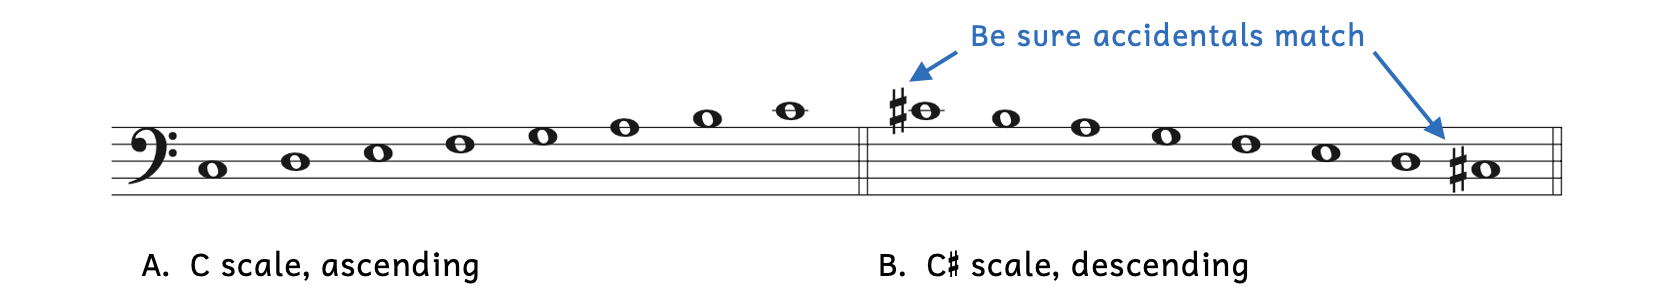 Step one: Write all pitches diatonically. Example A shows an ascending scale from C3 to C4. Example B shows a descending scale from C-sharp 4 to C-sharp 3.